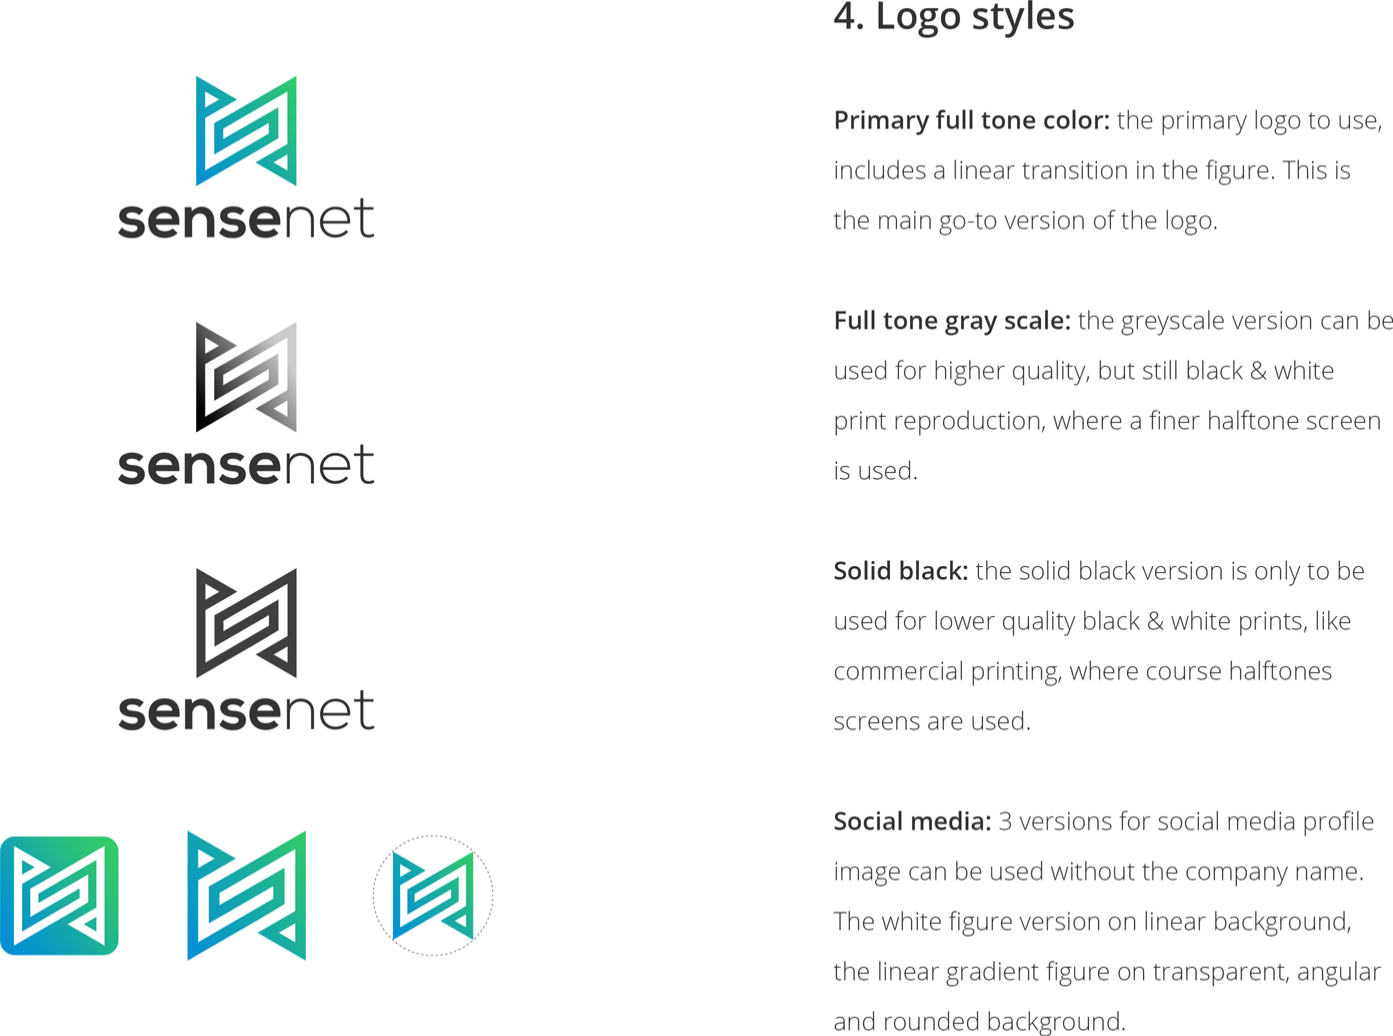 Page 6 of 11 - Sn-logo-and-style-identity-guide